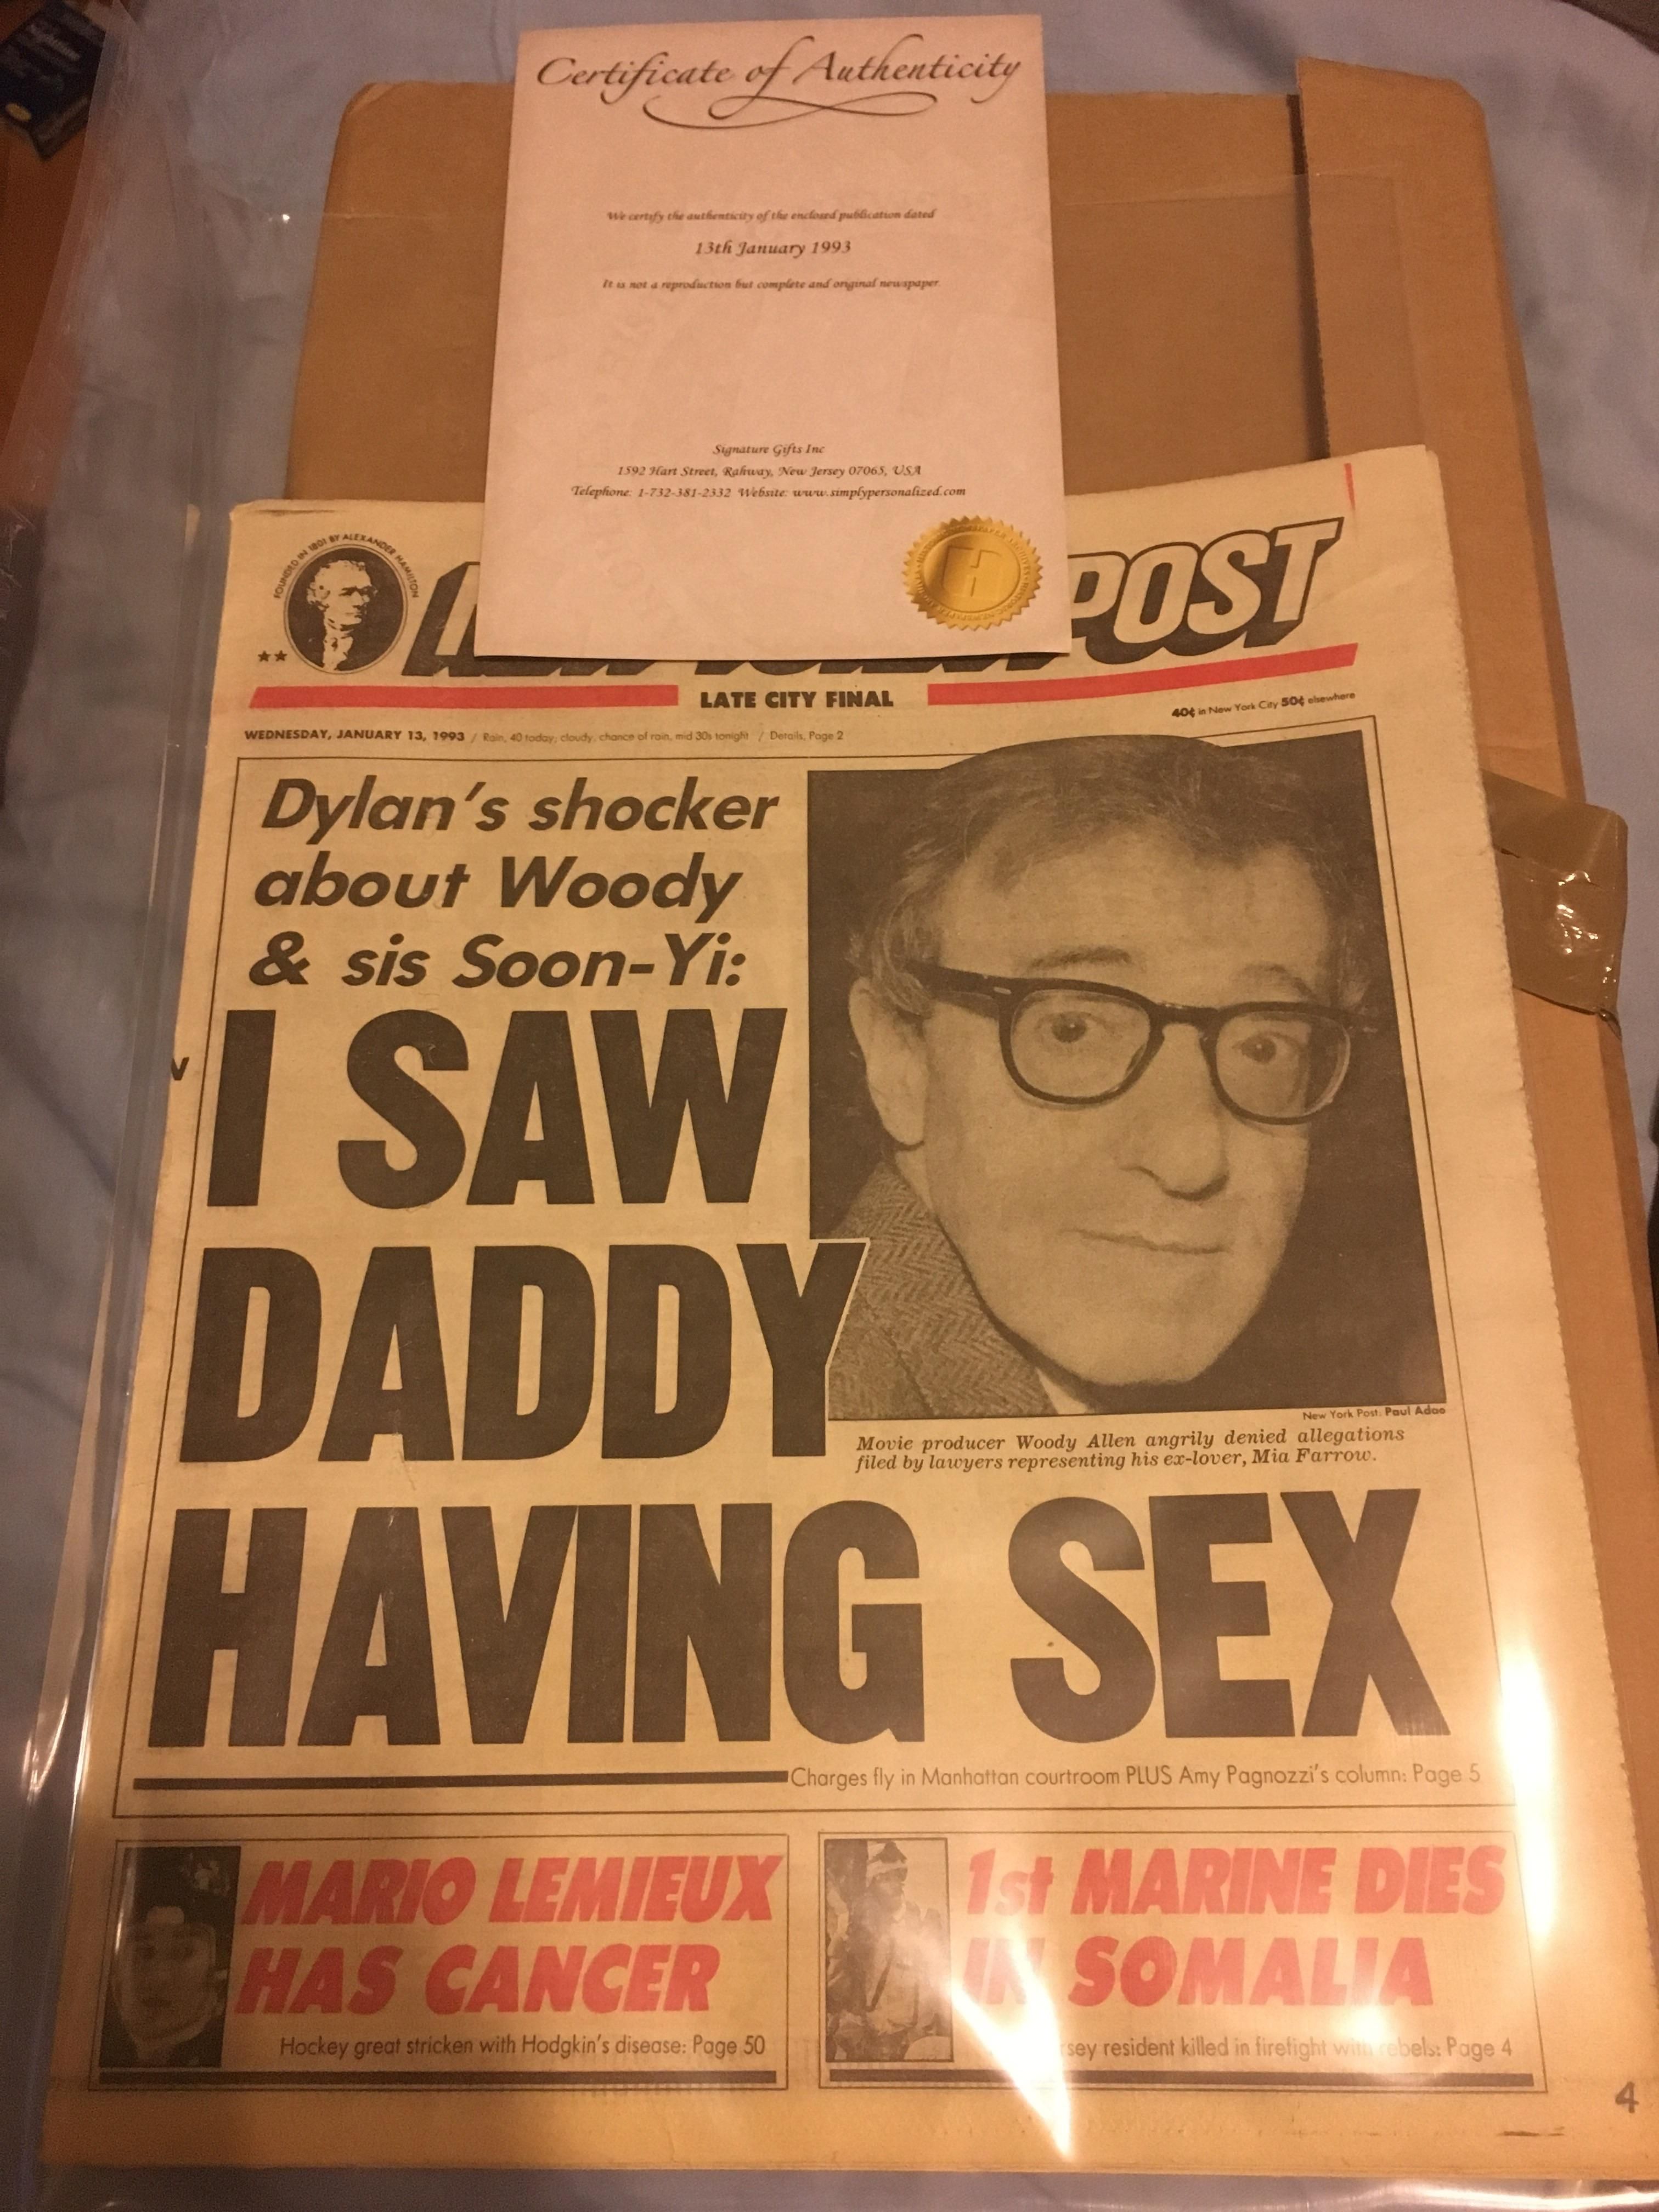 I got my friend an authentic newspaper from her actual date of birth as a gift. You don't get a chance to see it before it comes...